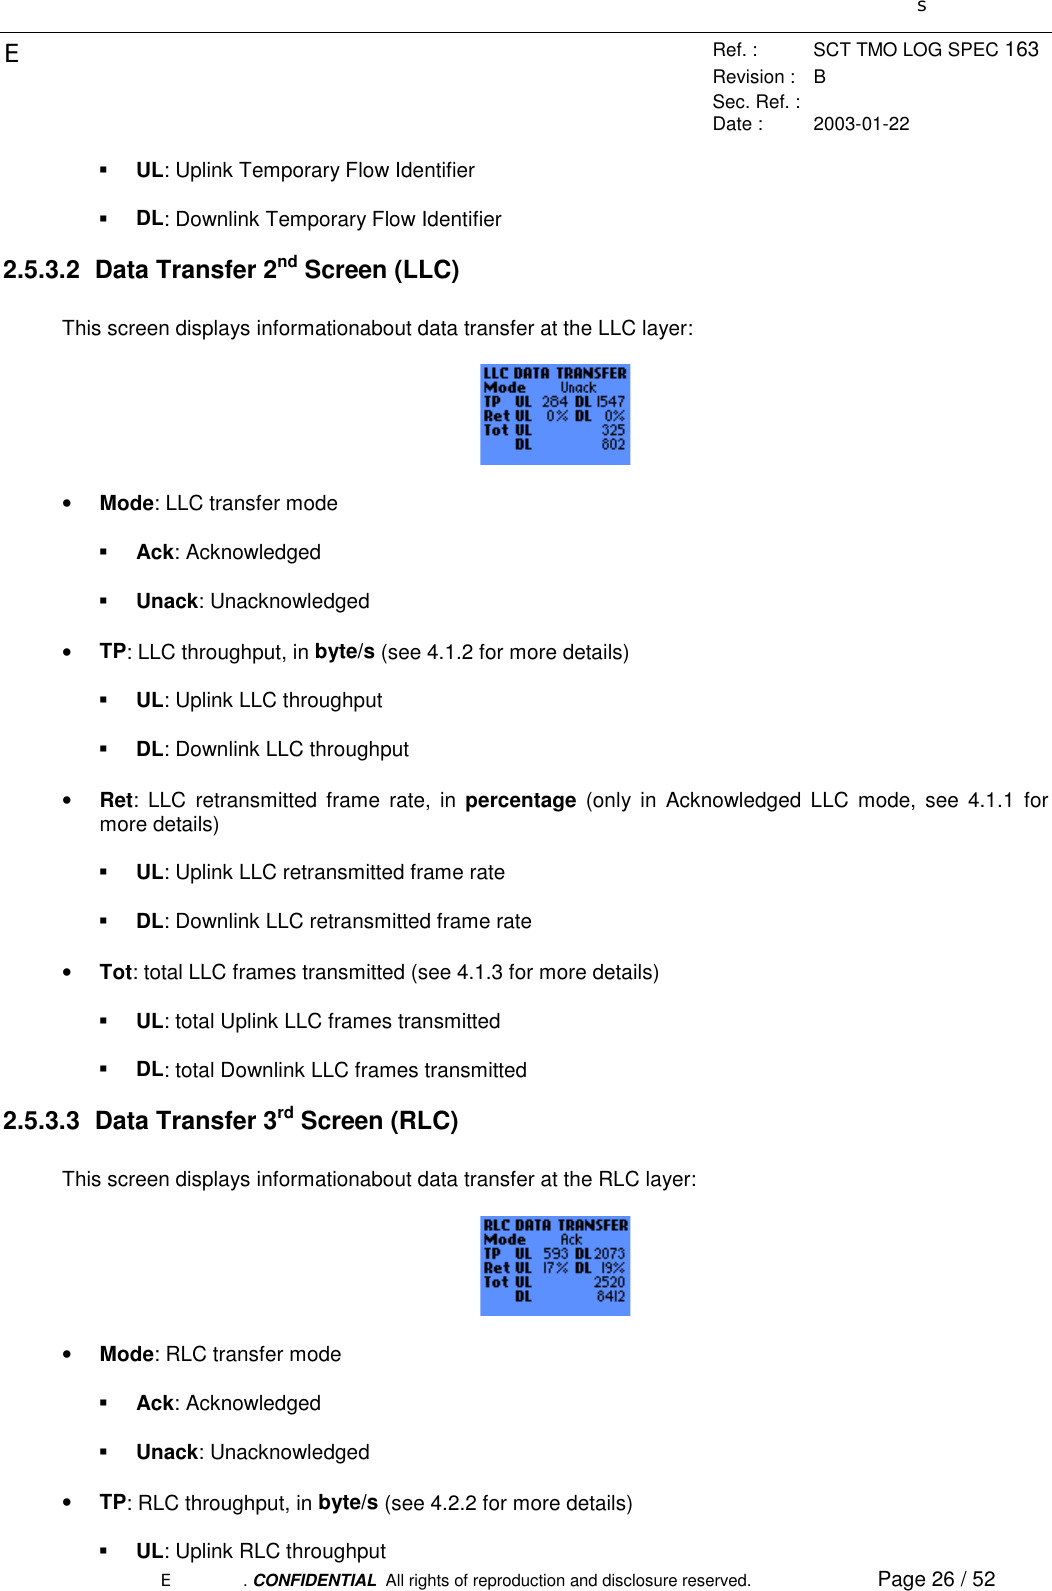 sERef. : SCT TMO LOG SPEC 163Revision : BSec. Ref. :Date : 2003-01-22E. CONFIDENTIAL  All rights of reproduction and disclosure reserved. Page 26 / 52! UL: Uplink Temporary Flow Identifier! DL: Downlink Temporary Flow Identifier2.5.3.2 Data Transfer 2nd Screen (LLC)This screen displays informationabout data transfer at the LLC layer:• Mode: LLC transfer mode! Ack: Acknowledged! Unack: Unacknowledged• TP: LLC throughput, in byte/s (see 4.1.2 for more details)! UL: Uplink LLC throughput! DL: Downlink LLC throughput• Ret: LLC retransmitted frame rate, in percentage (only in Acknowledged LLC mode, see 4.1.1 formore details)! UL: Uplink LLC retransmitted frame rate! DL: Downlink LLC retransmitted frame rate• Tot: total LLC frames transmitted (see 4.1.3 for more details)! UL: total Uplink LLC frames transmitted! DL: total Downlink LLC frames transmitted2.5.3.3 Data Transfer 3rd Screen (RLC)This screen displays informationabout data transfer at the RLC layer:• Mode: RLC transfer mode! Ack: Acknowledged! Unack: Unacknowledged• TP: RLC throughput, in byte/s (see 4.2.2 for more details)! UL: Uplink RLC throughput